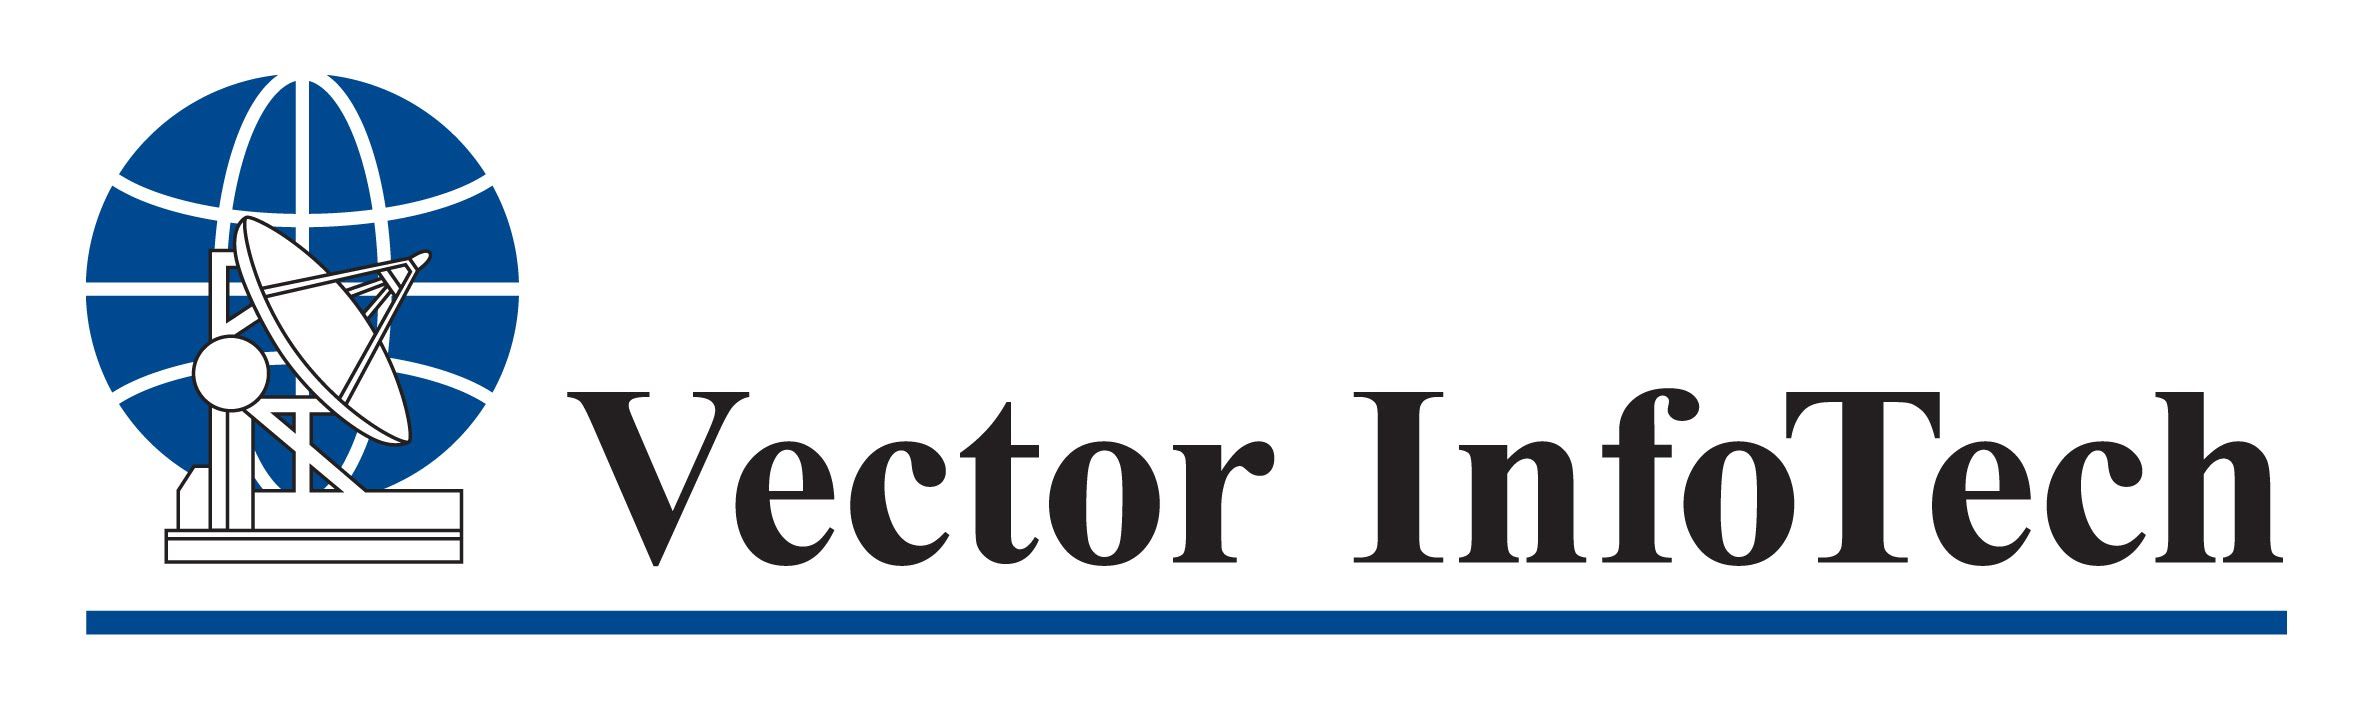 Vector Infotech Systems And Networks International Pte Ltd